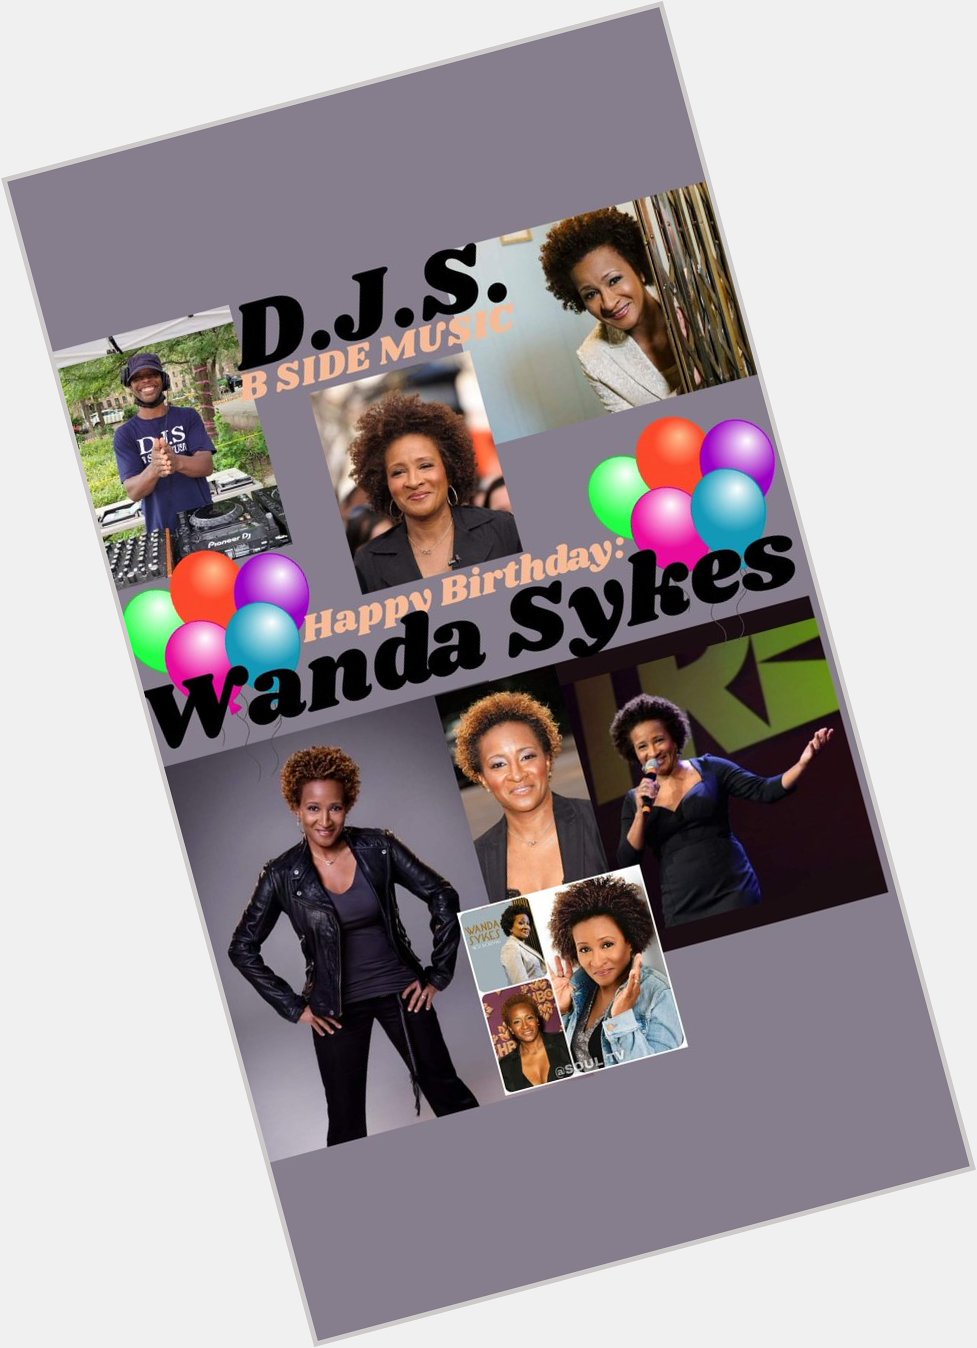 I(D.J.S.)\"B SIDE MUSIC\" saying Happy Birthday to Actress/Stand-Up Comedian/Writer: \"WANDA SYKES\"!!! 